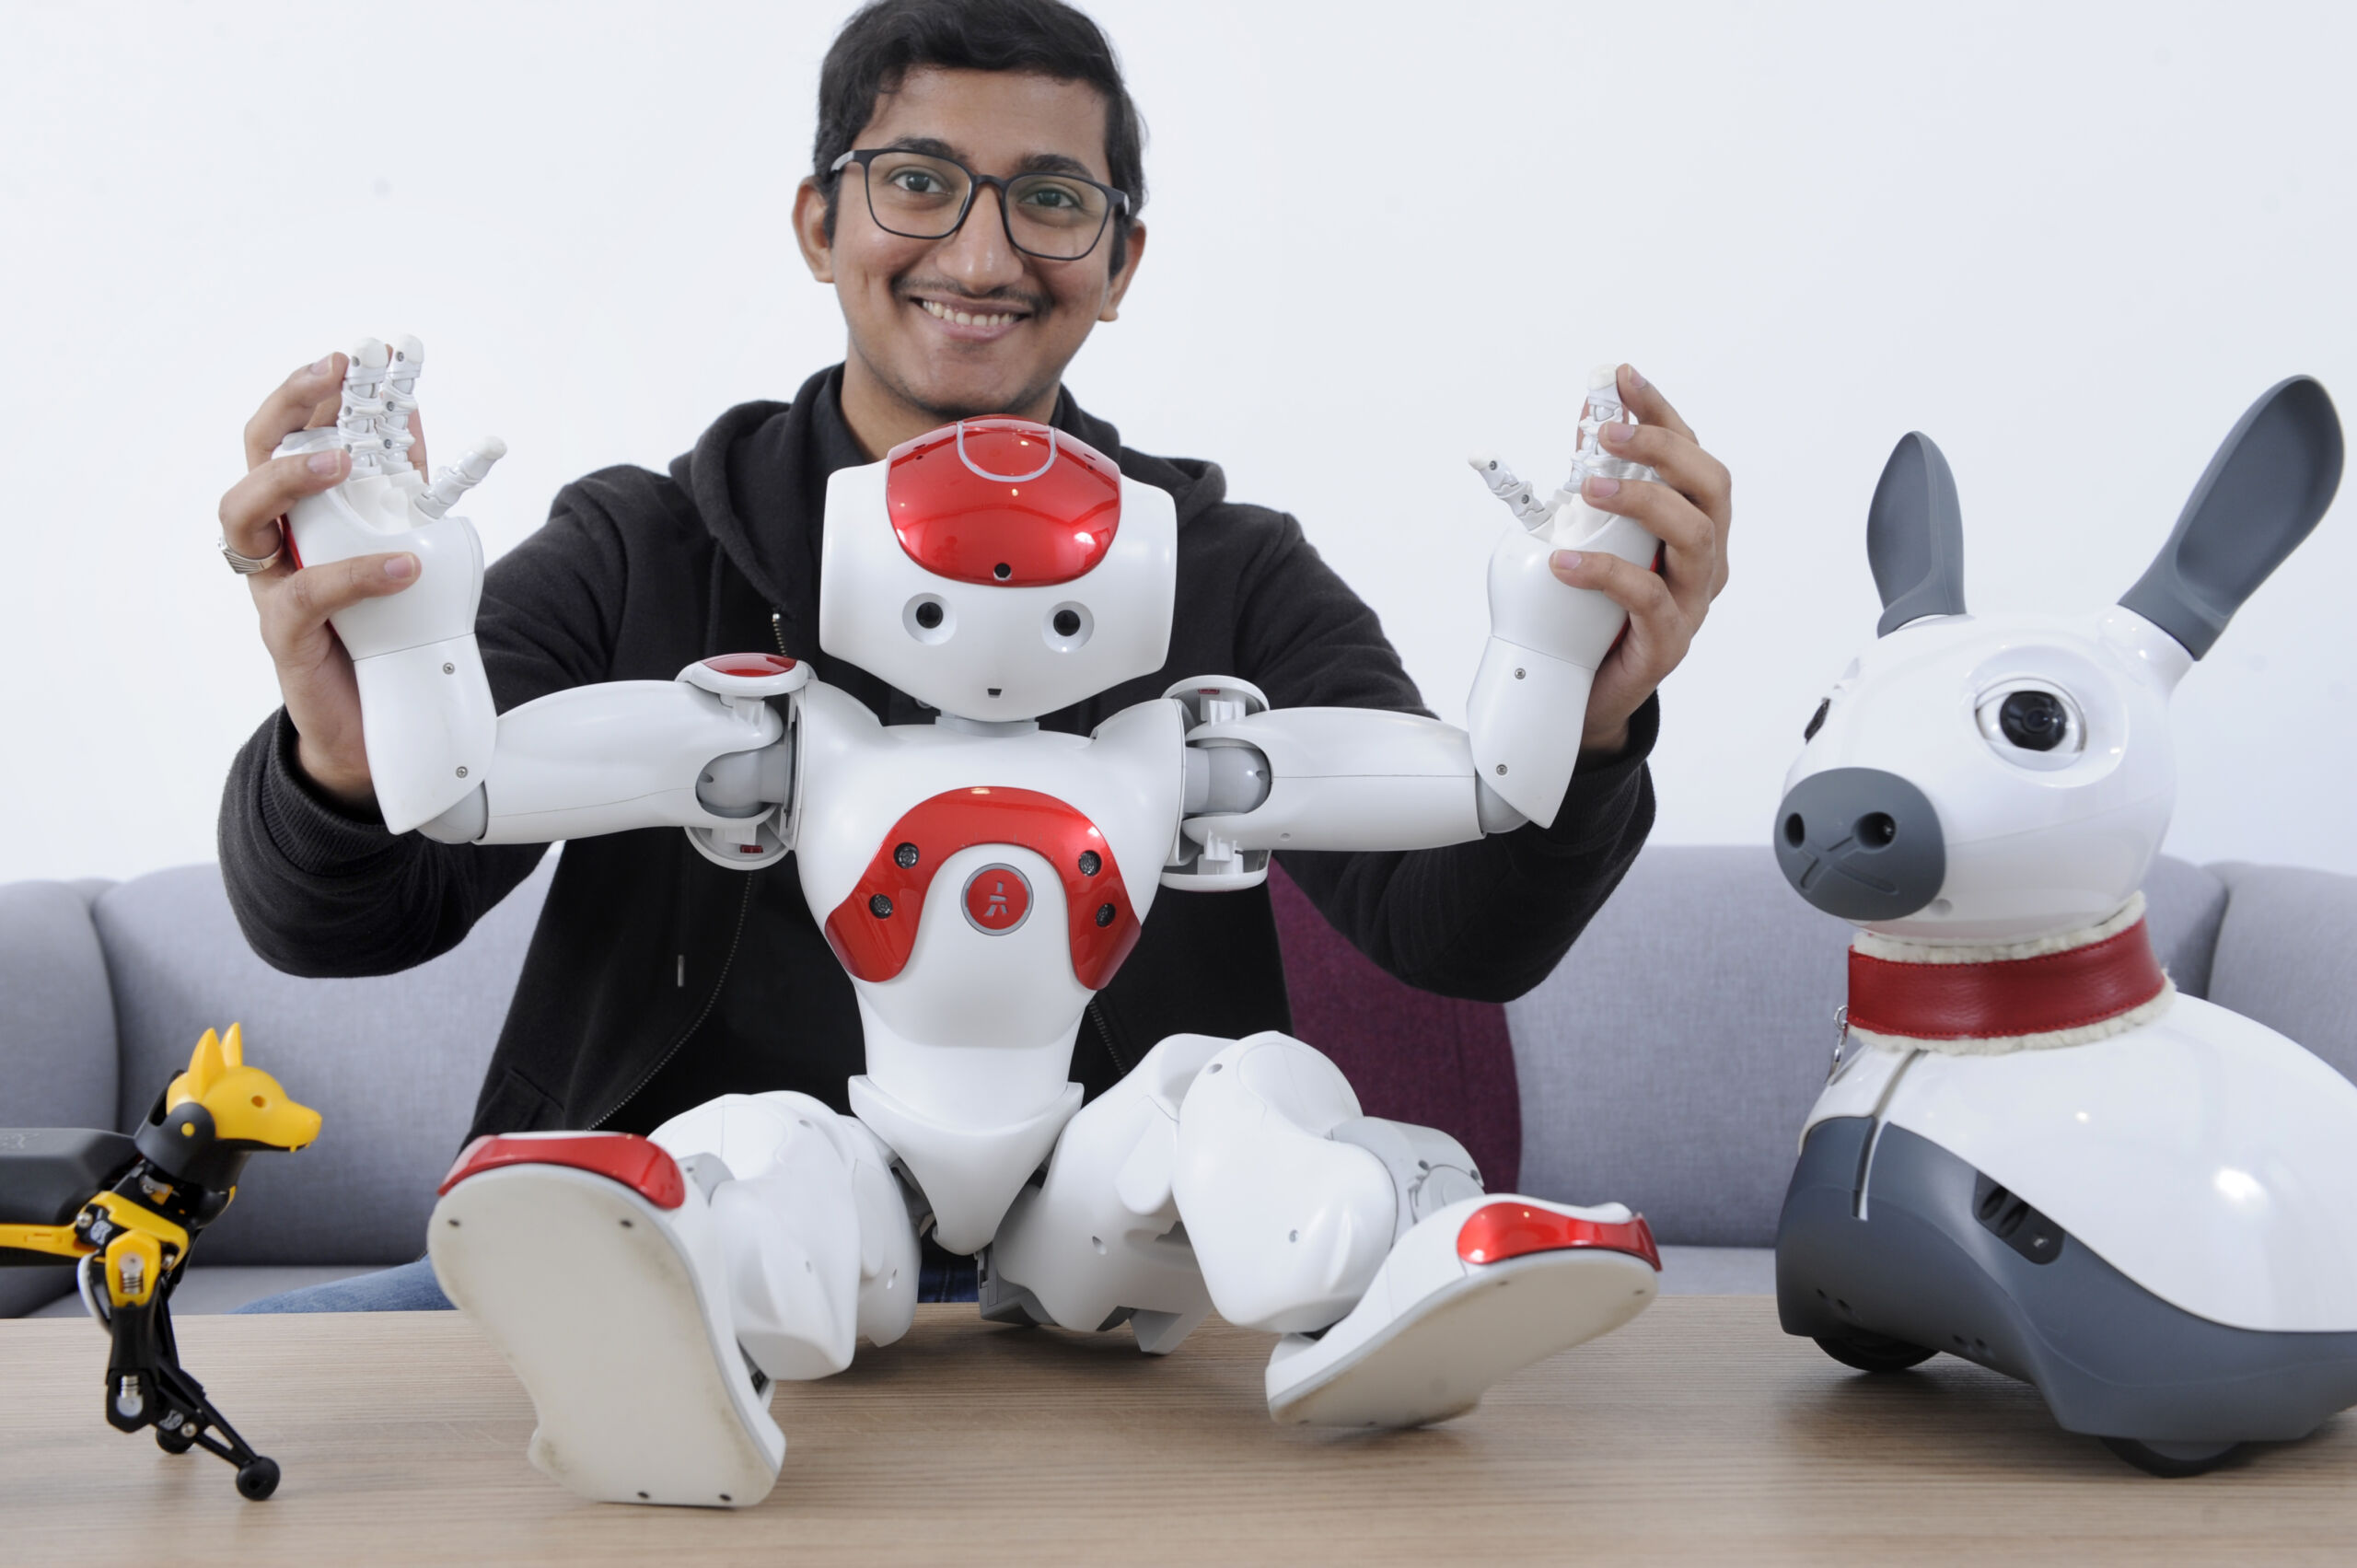 A man plays with a humanoid robot while a canine robot looks on